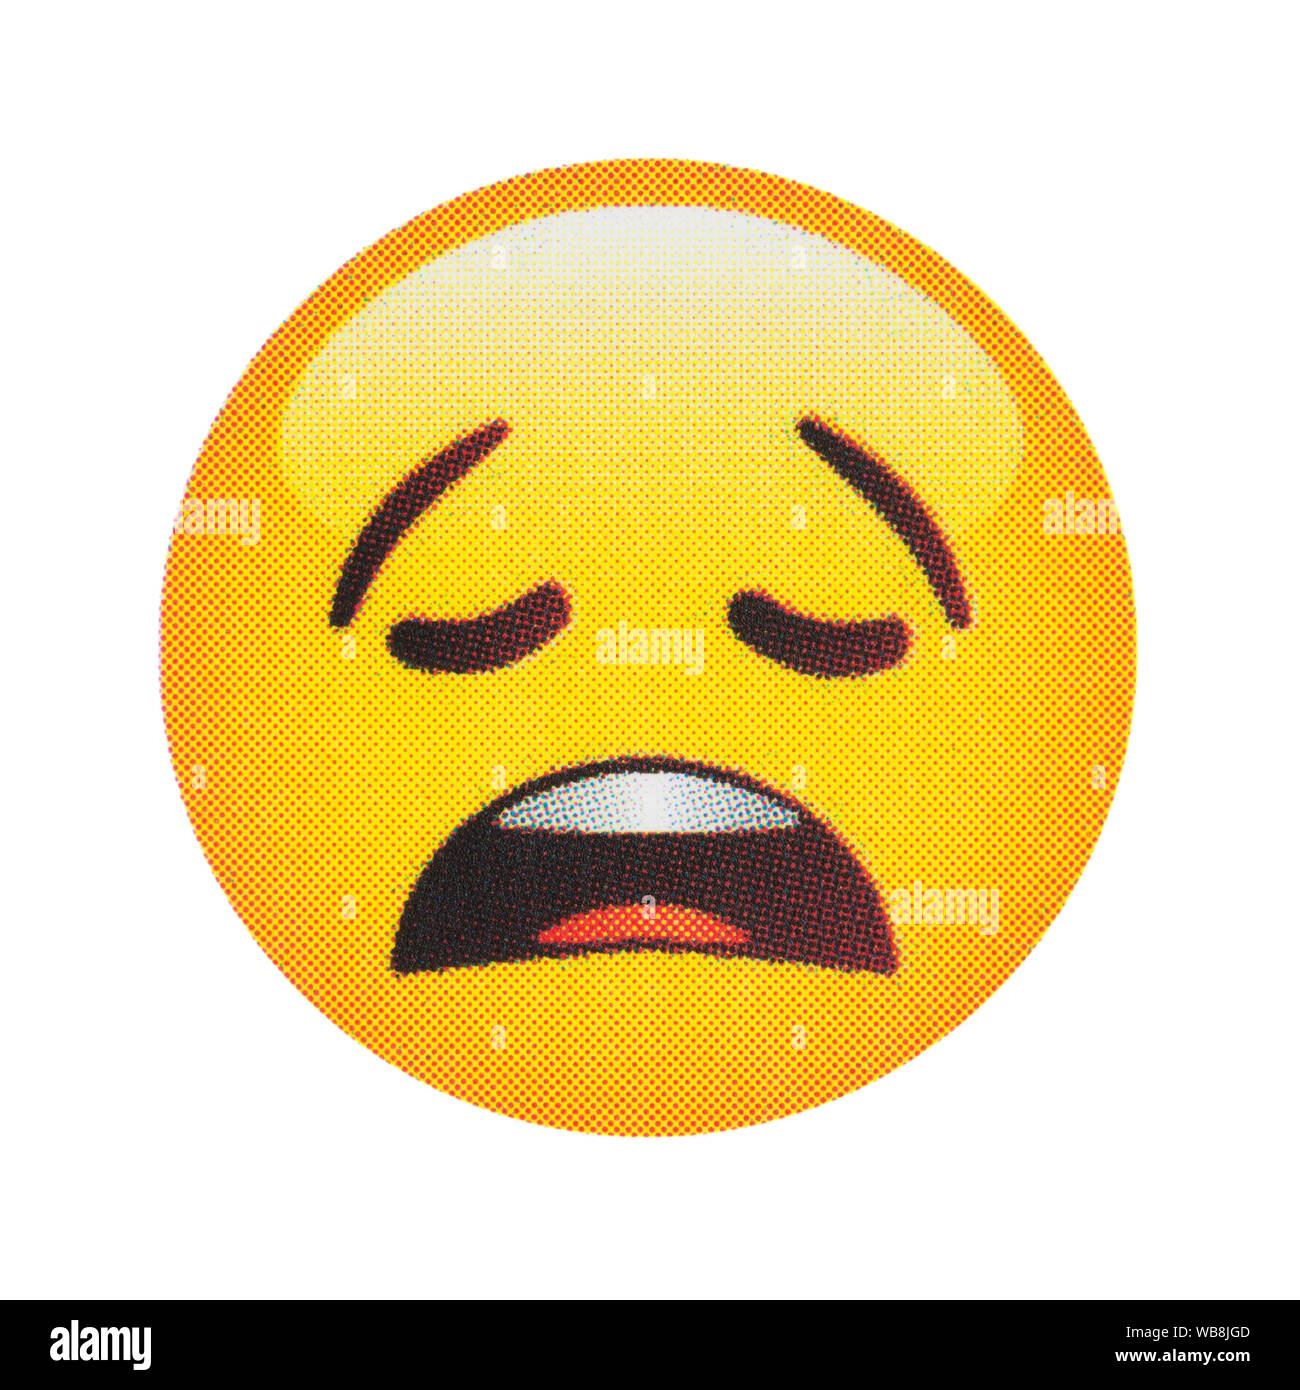 Weary face emoticon Stock Photo